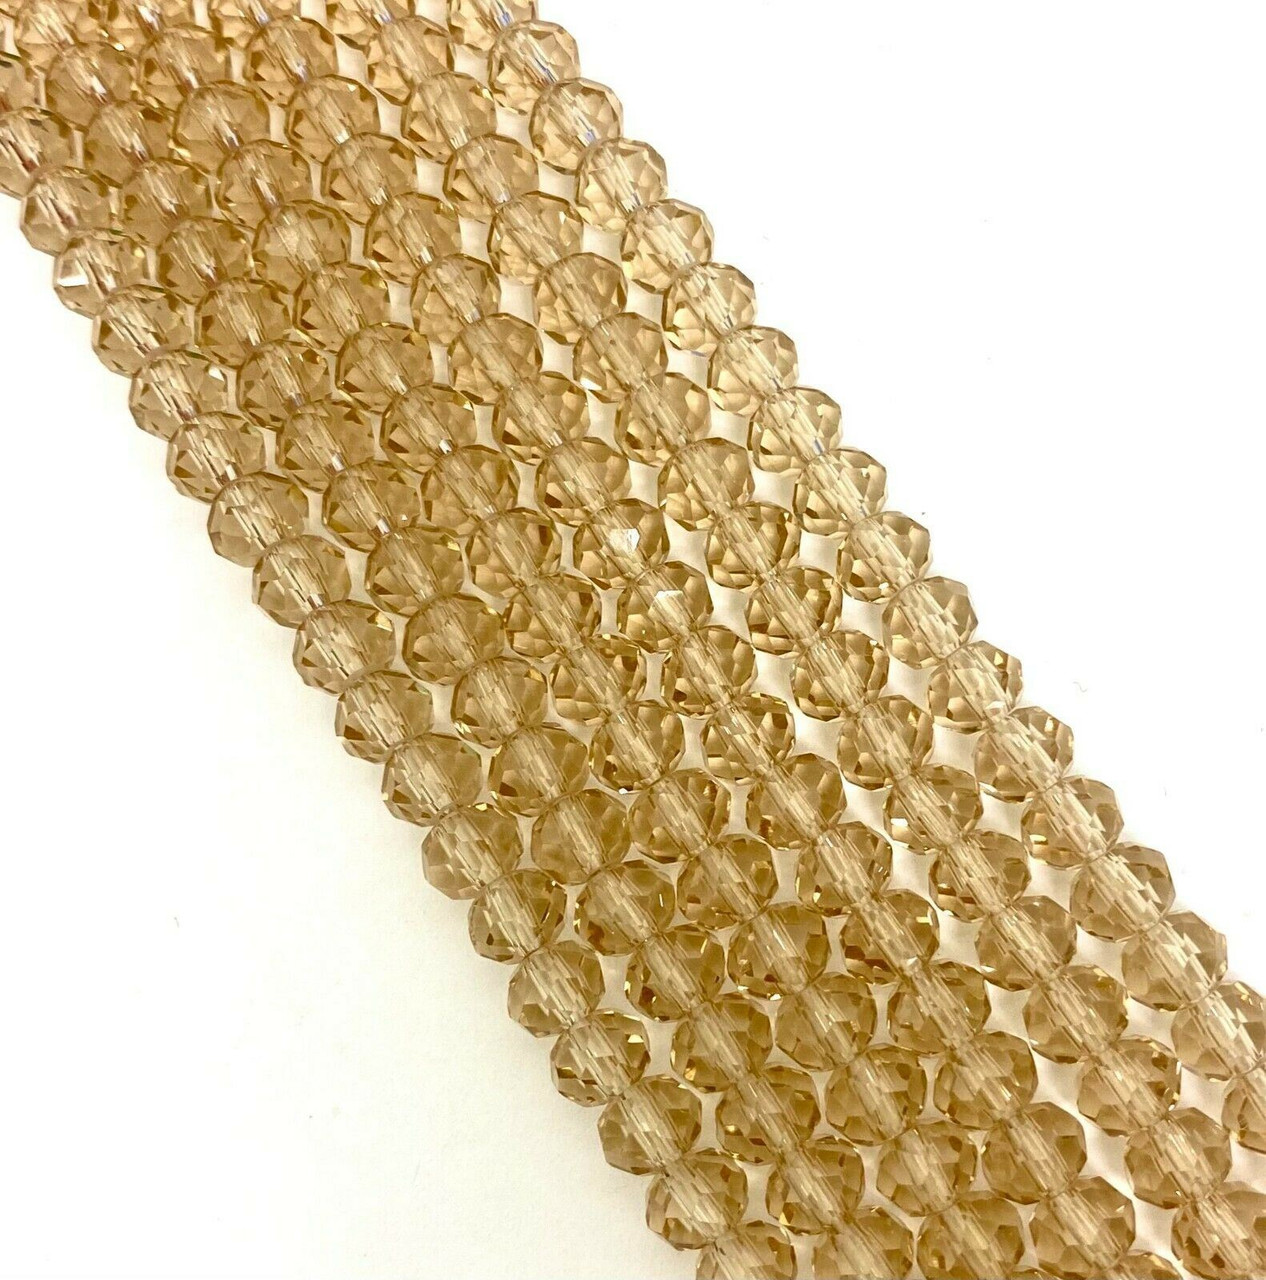 6x4mm Glass Rondelle beads - LIGHT COPPER - approx 18 inch strand (approx 100 beads)